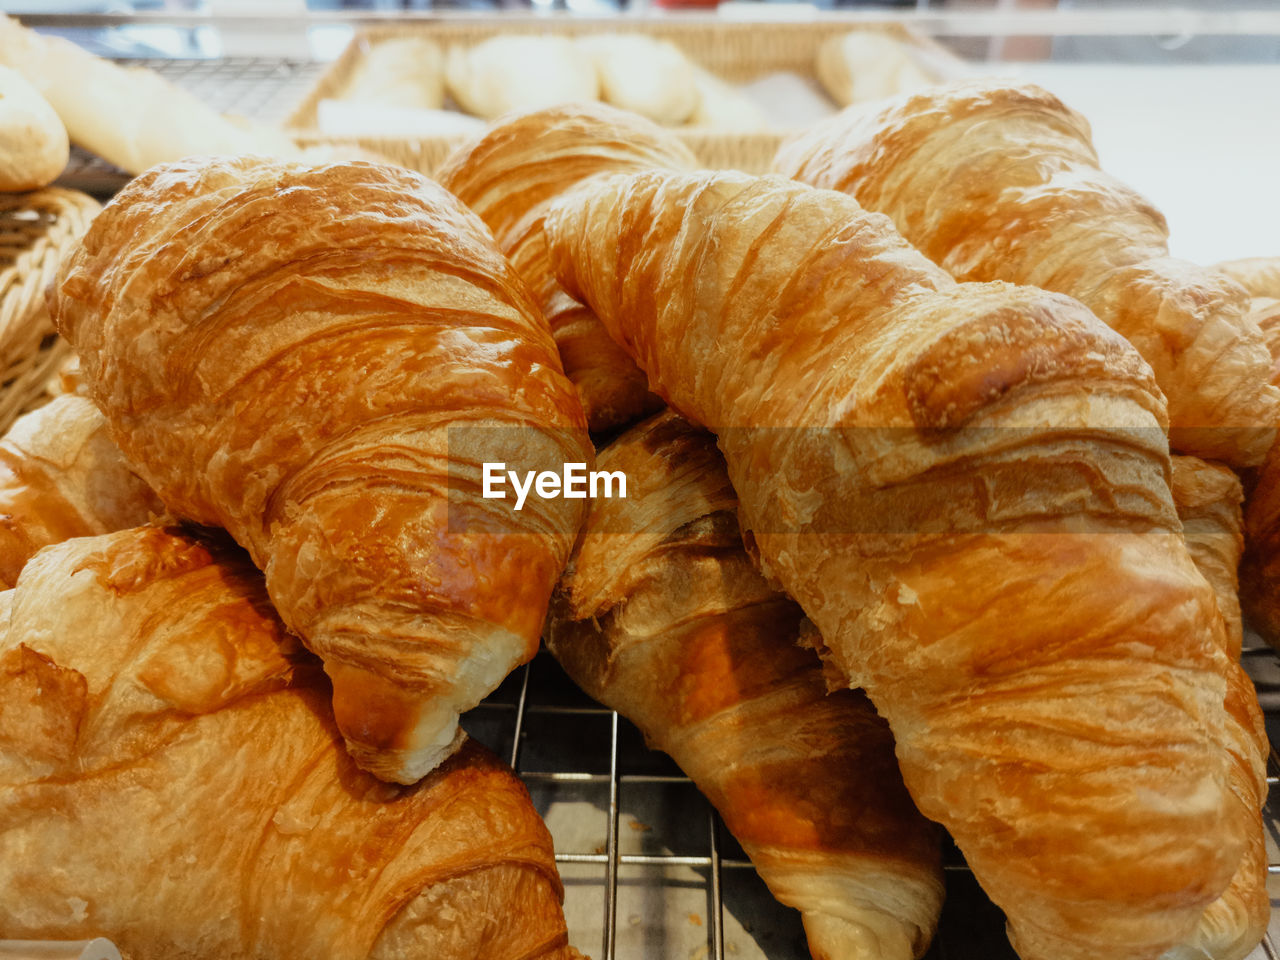 Close-up of croissant on display at store